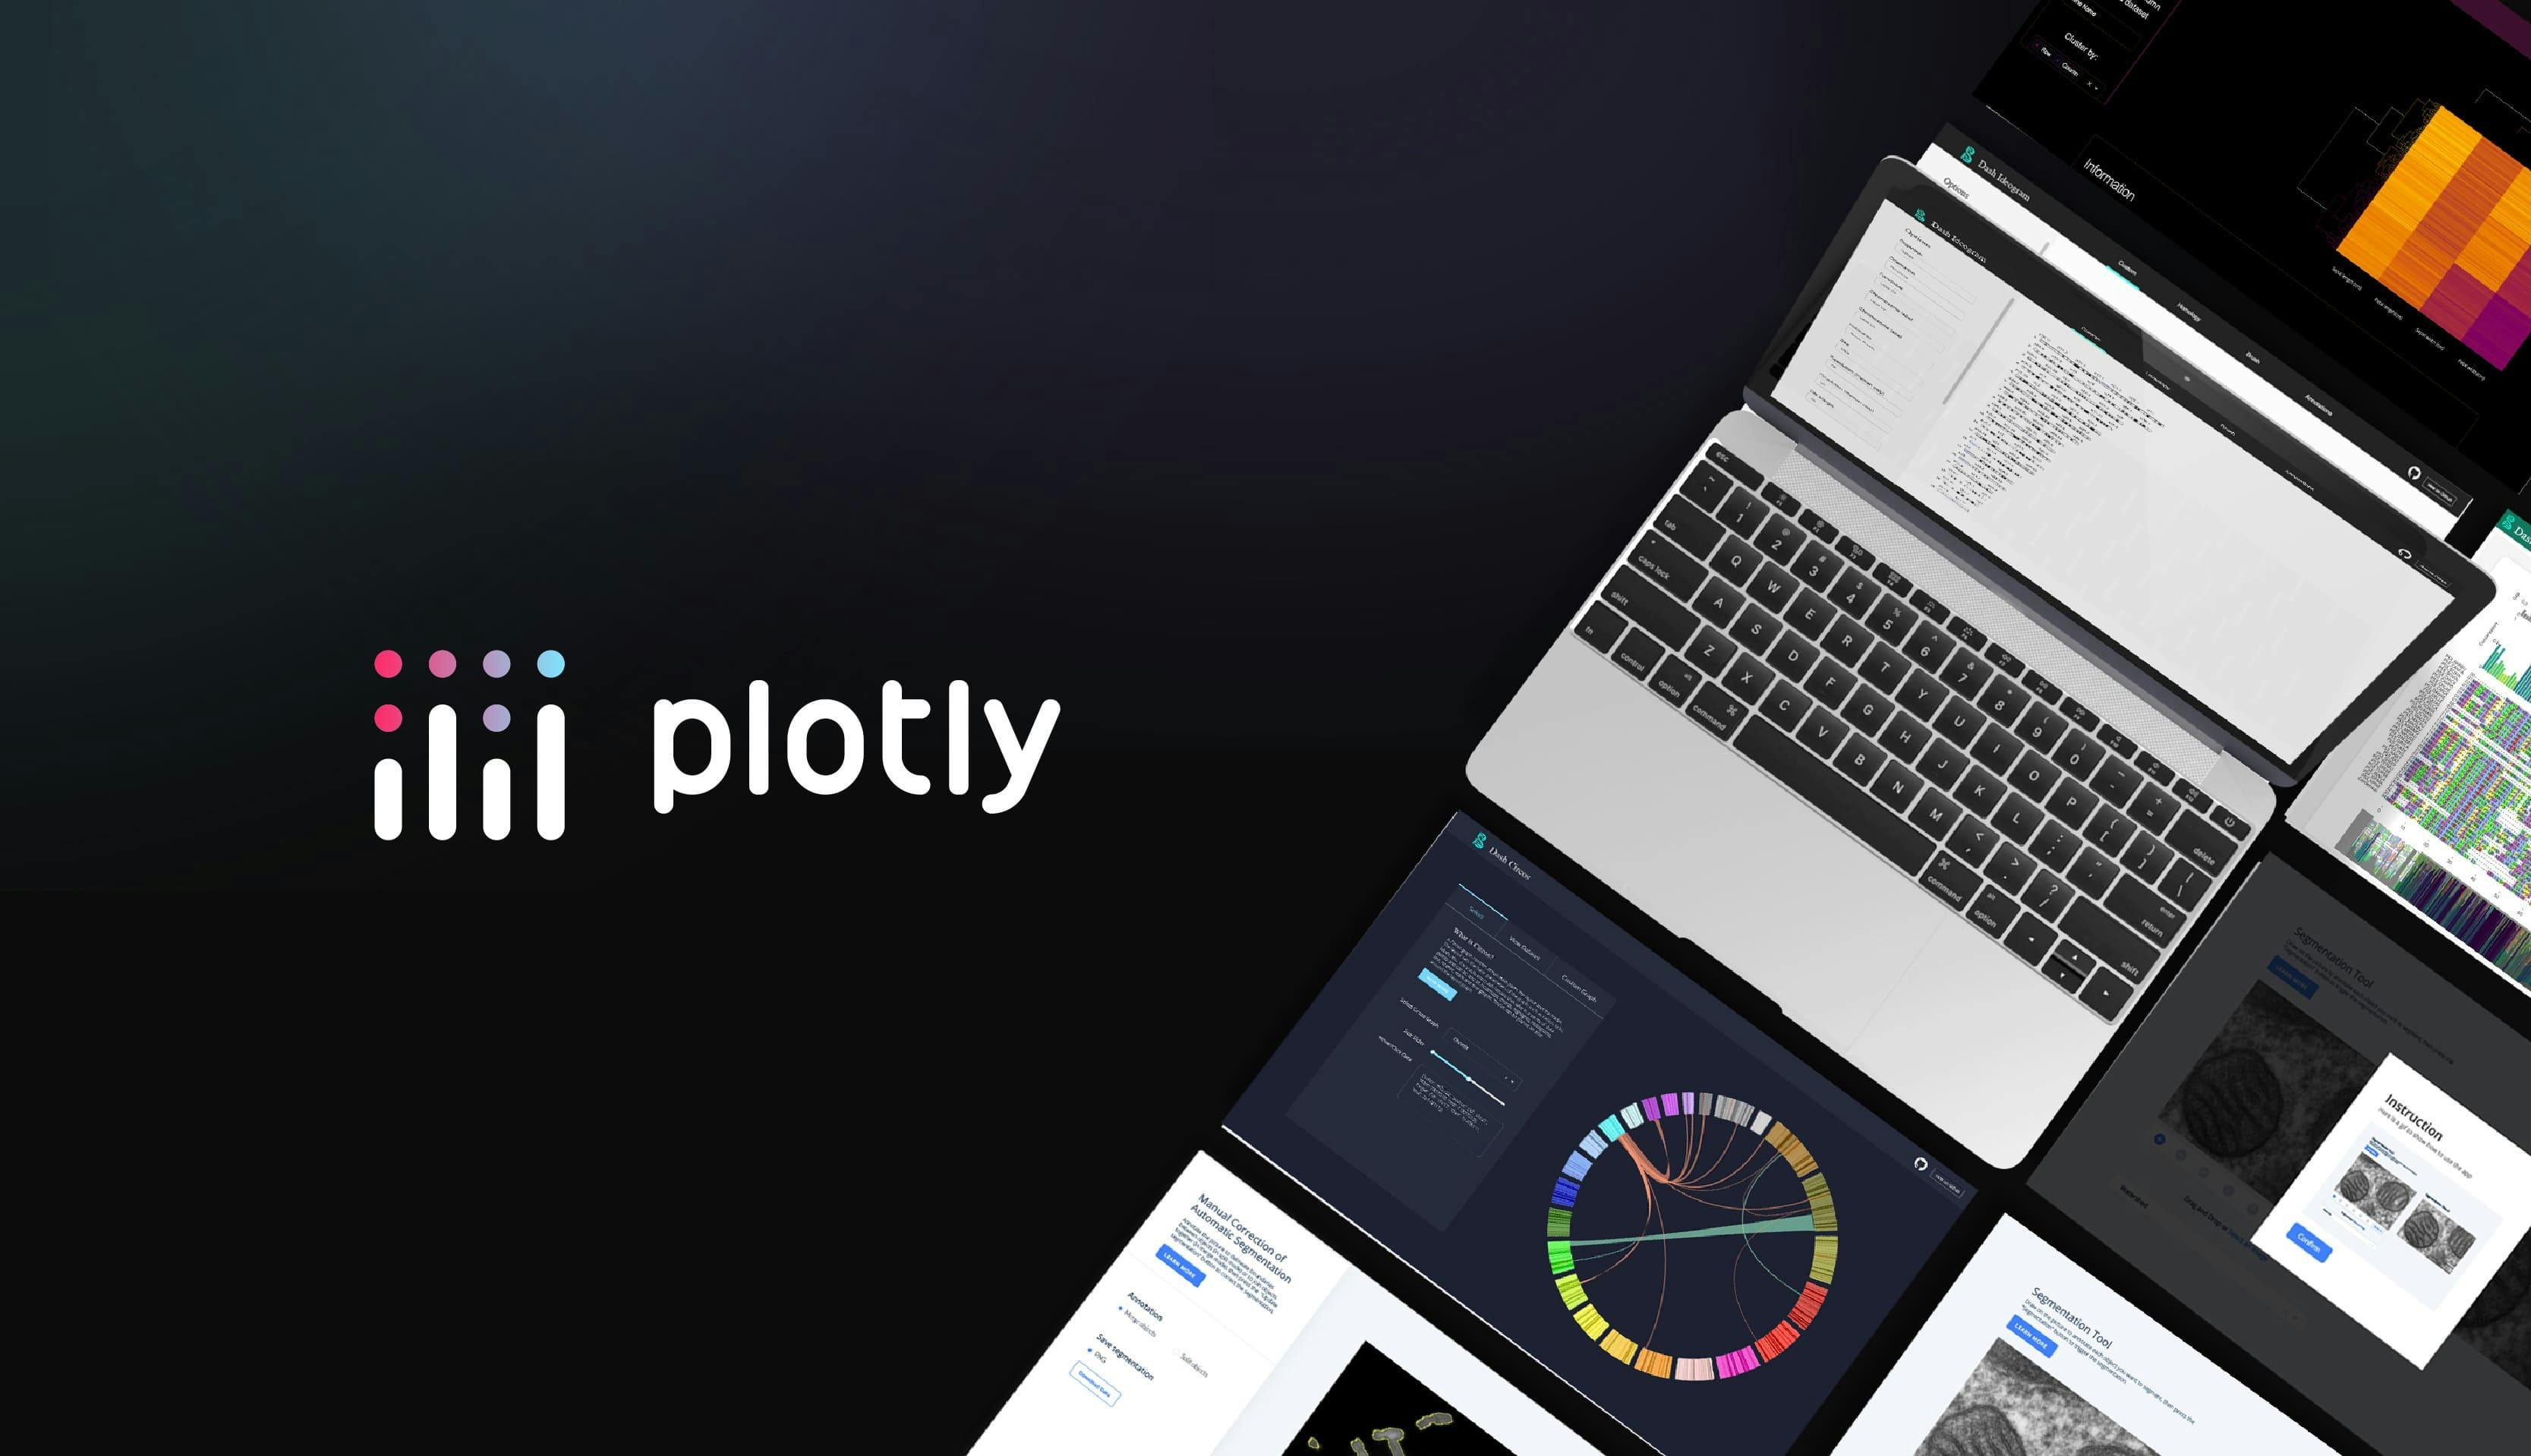 About Plotly